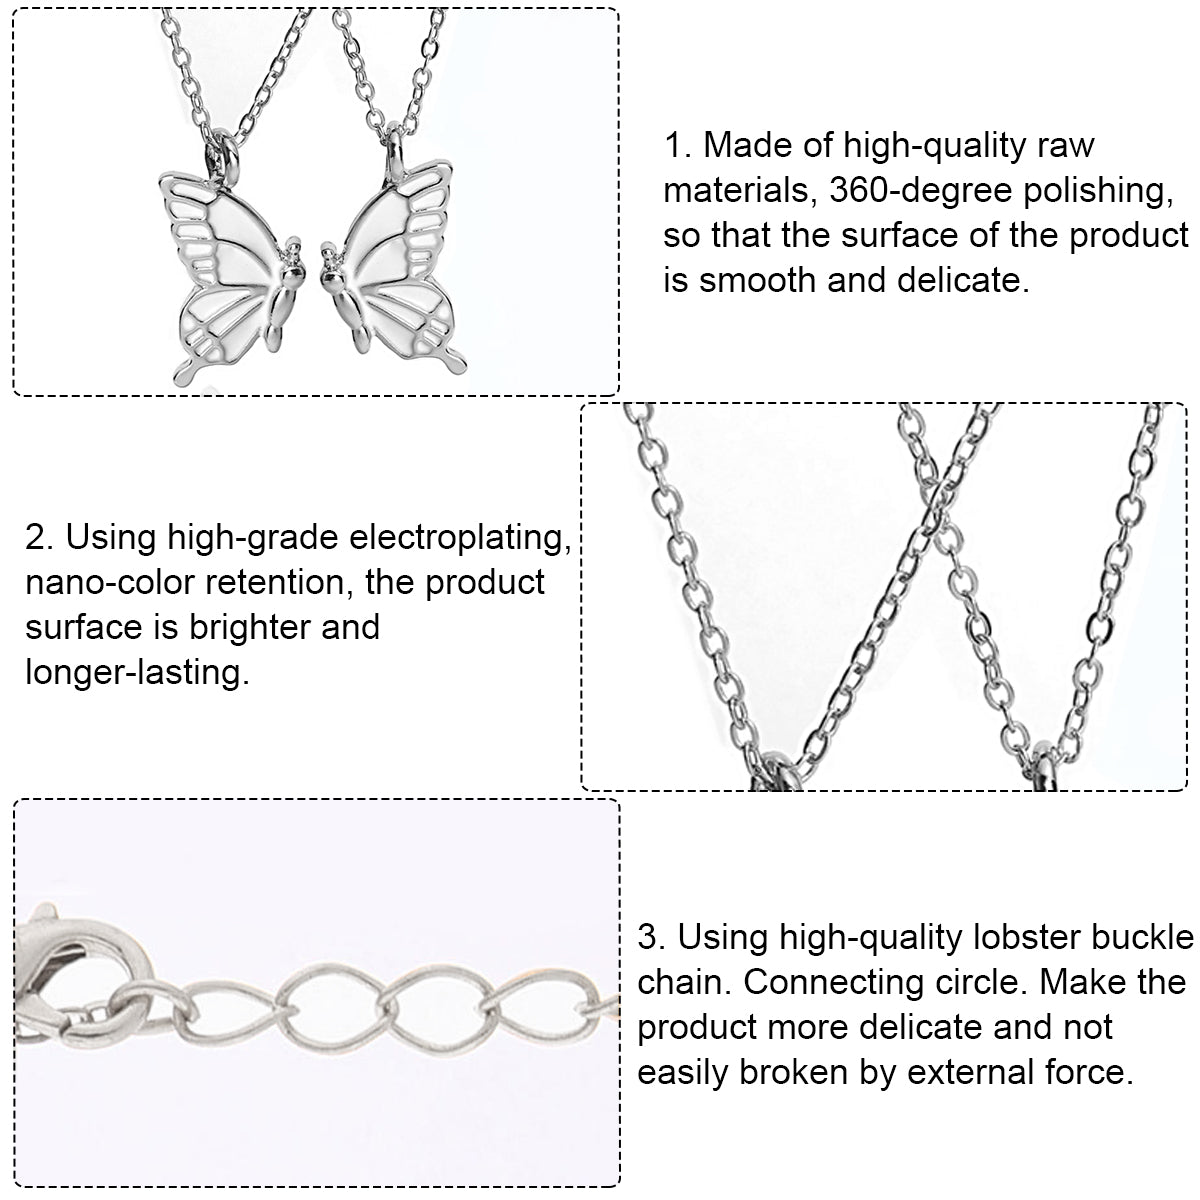 SANNIDHI 2 Pcs Necklace For Women Girls With Butterfly Pendant, Charm Necklace Alloy Necklace Gift For Birthday, Anniversary, Valentine Day(Sliver)